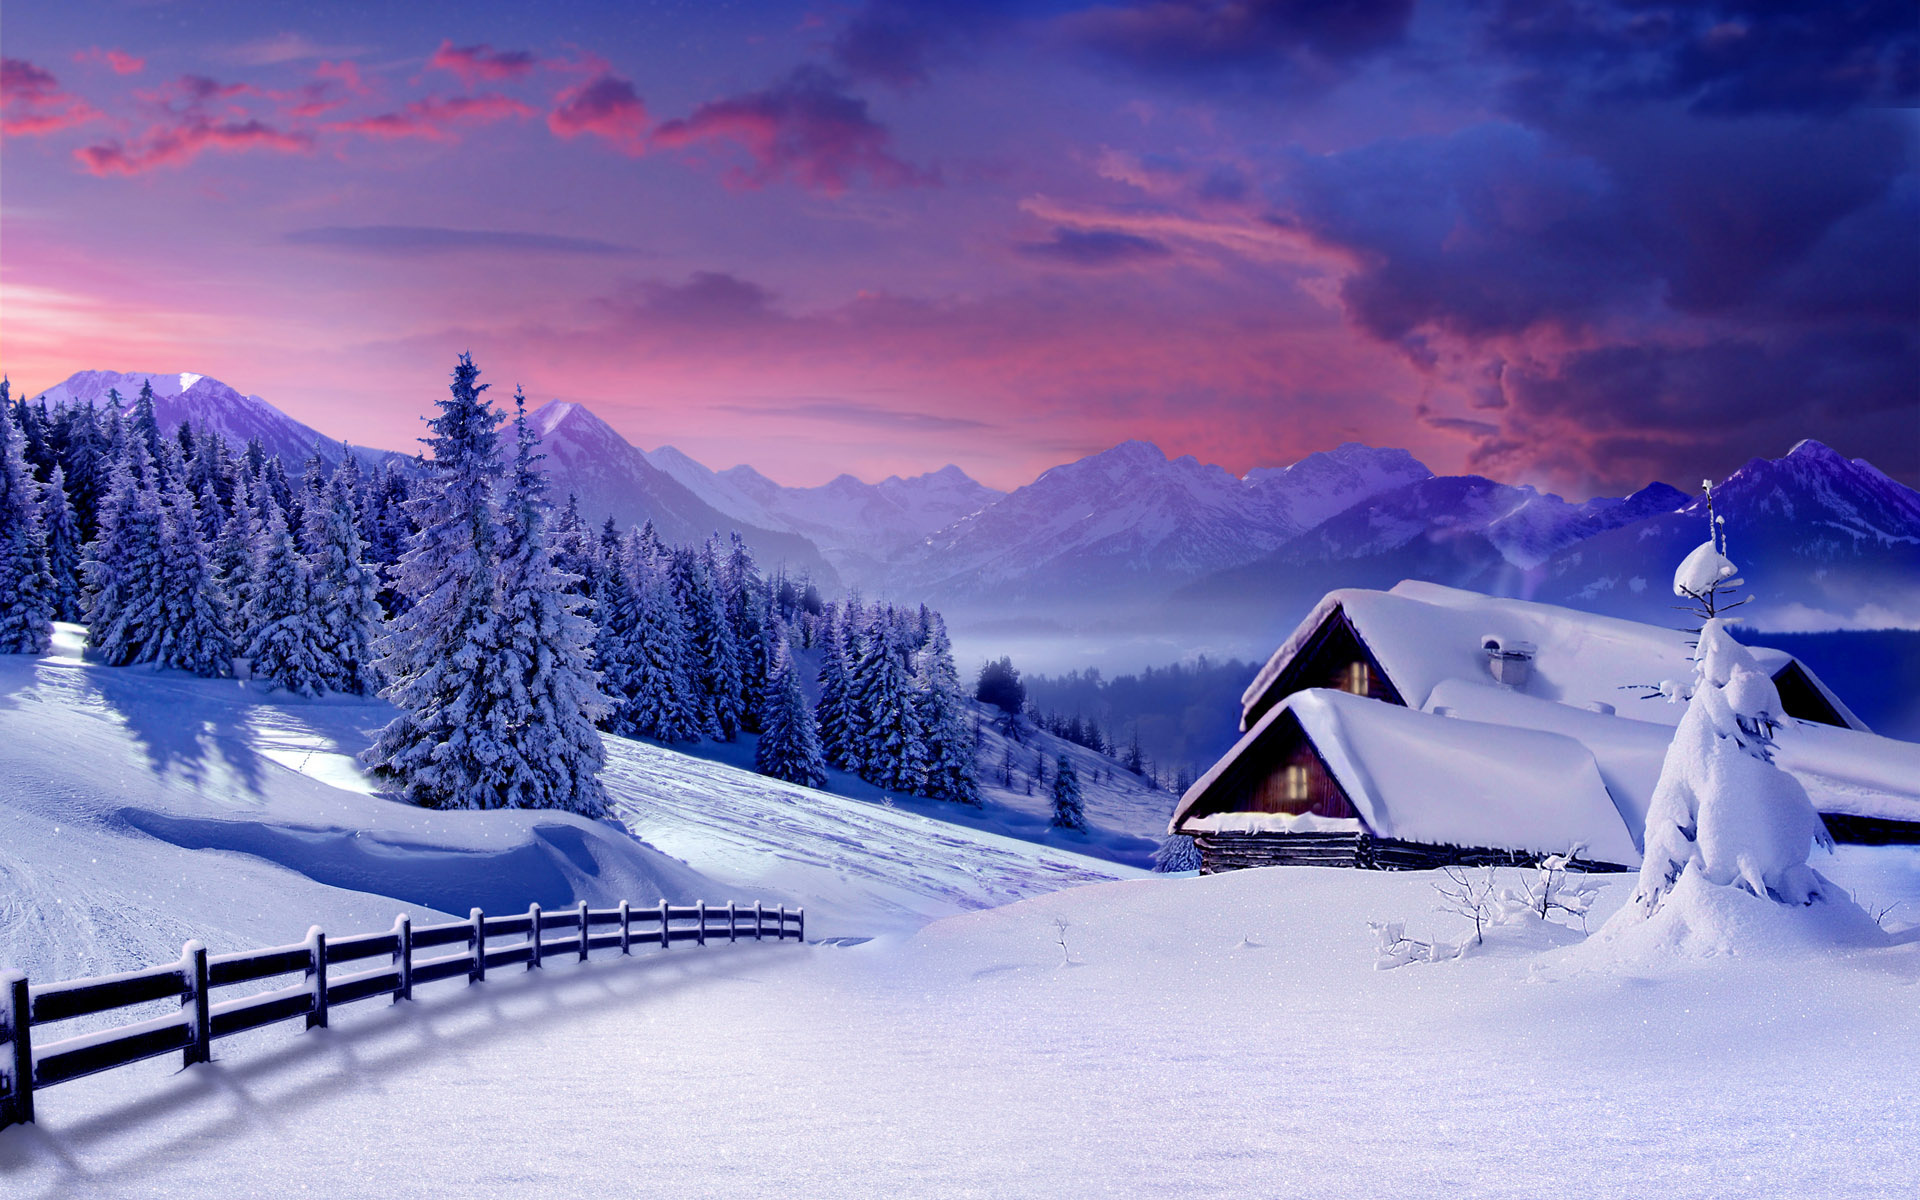  Winter HD Android Wallpapers